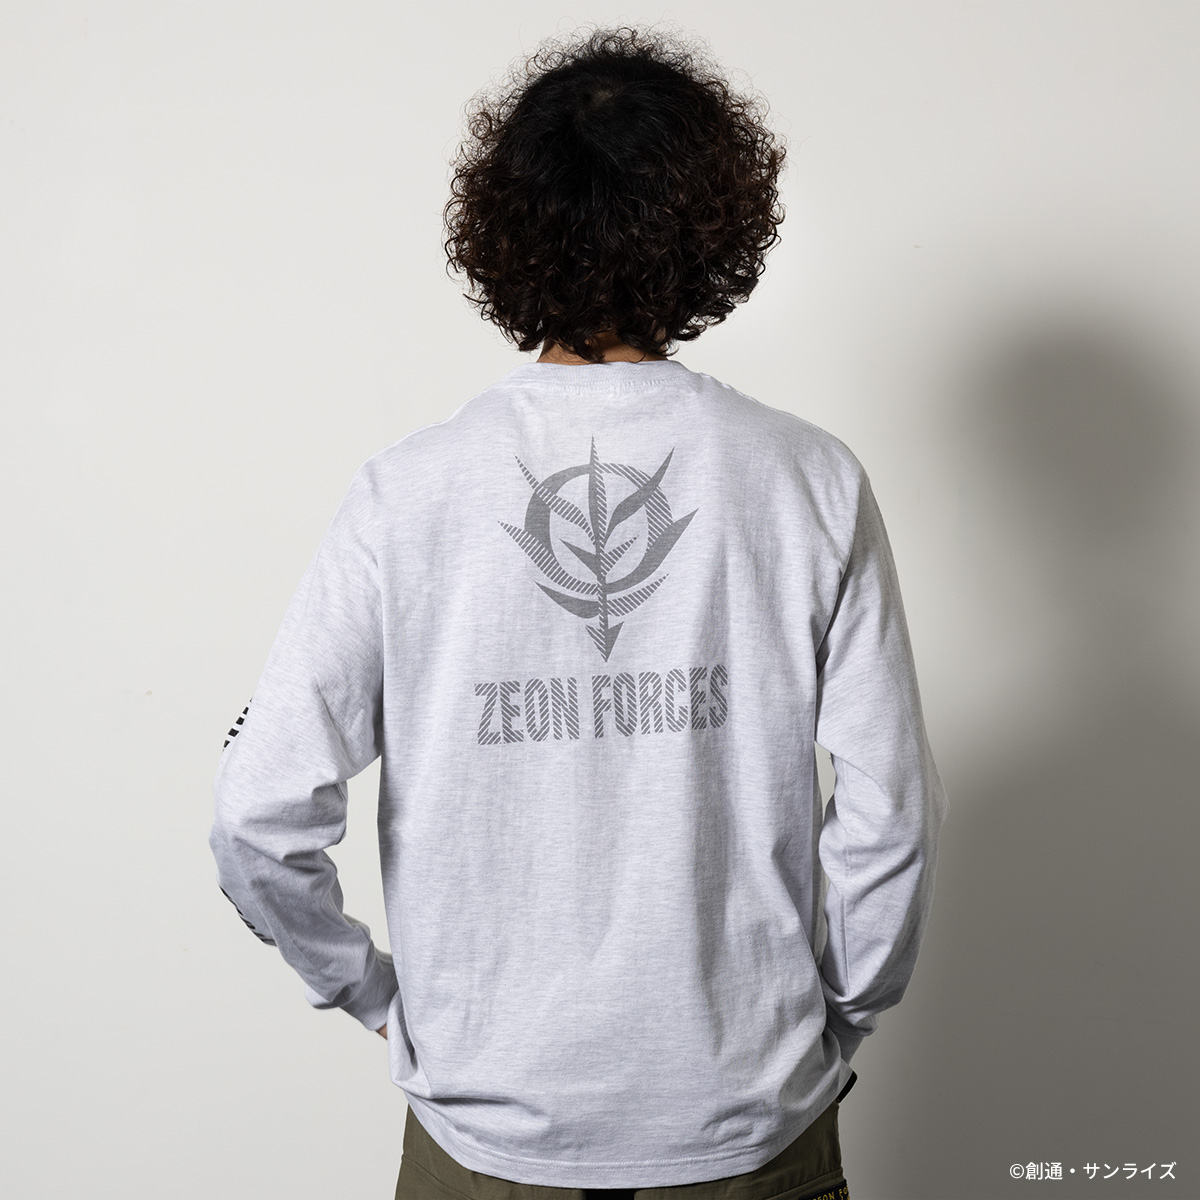 STRICT-G.ARMS『機動戦士ガンダム』長袖Tシャツ リフレクタープリント ZEON FORCES